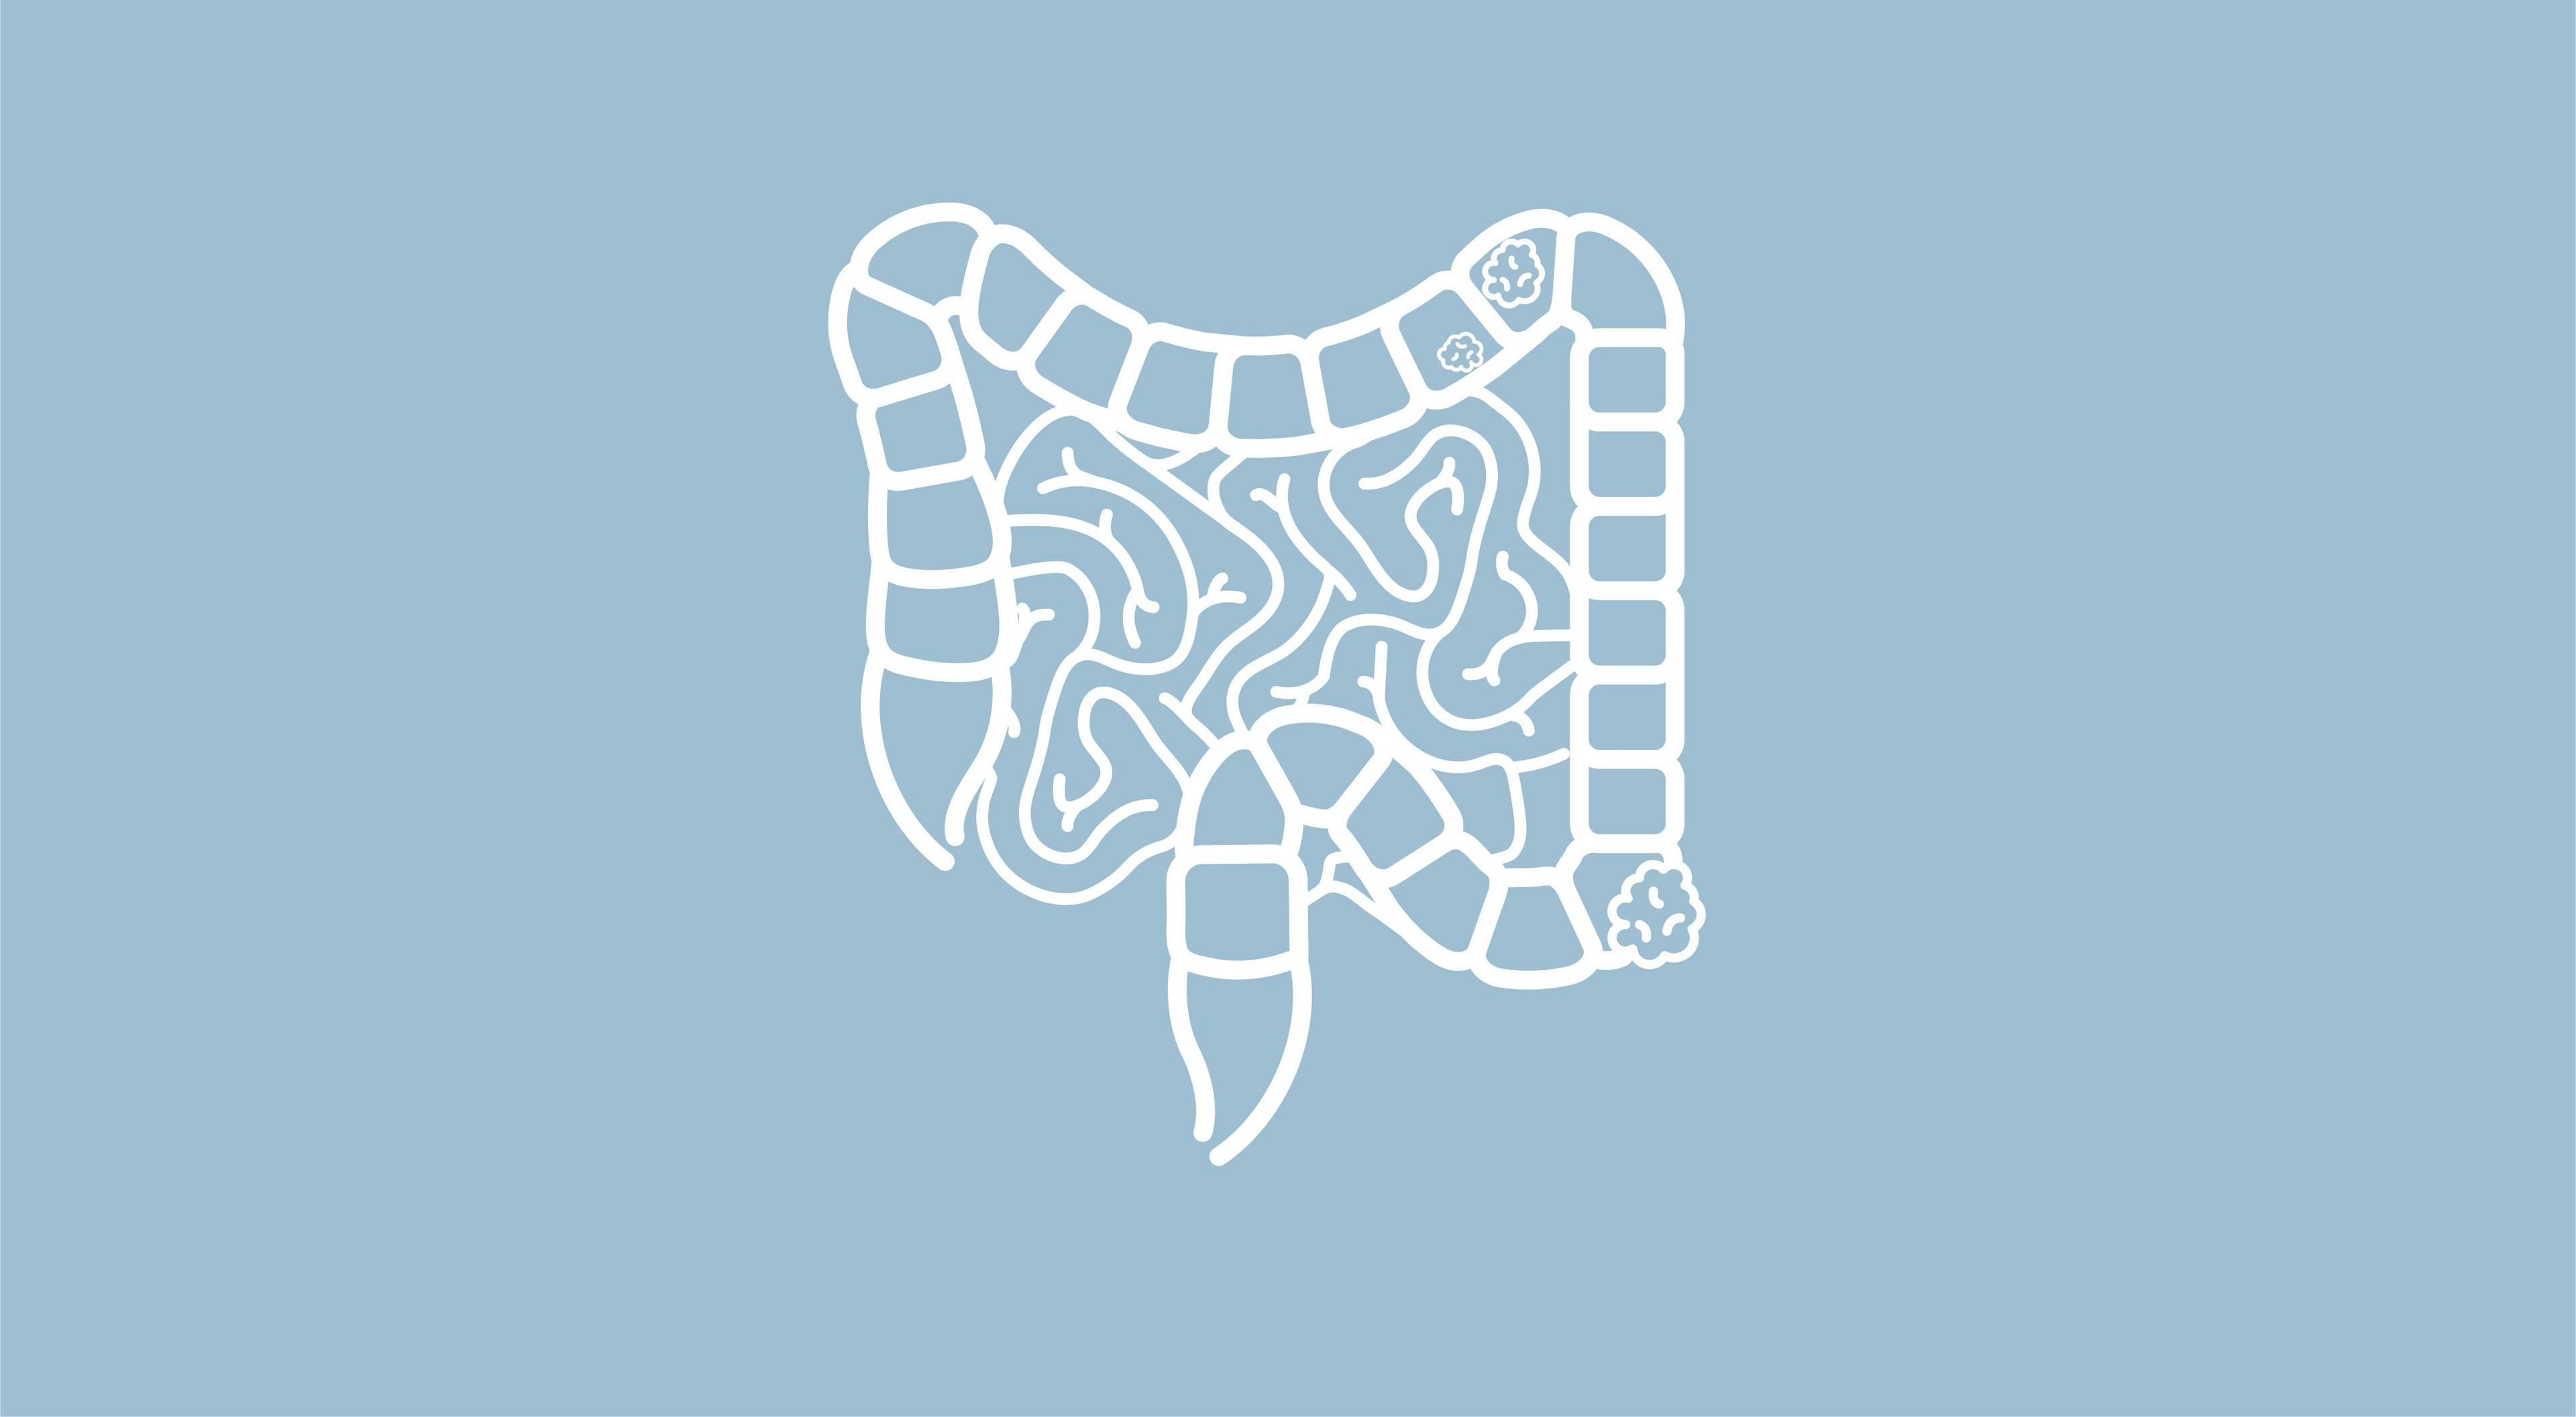 USPSTF Recommends Earlier Screening for Colorectal Cancer